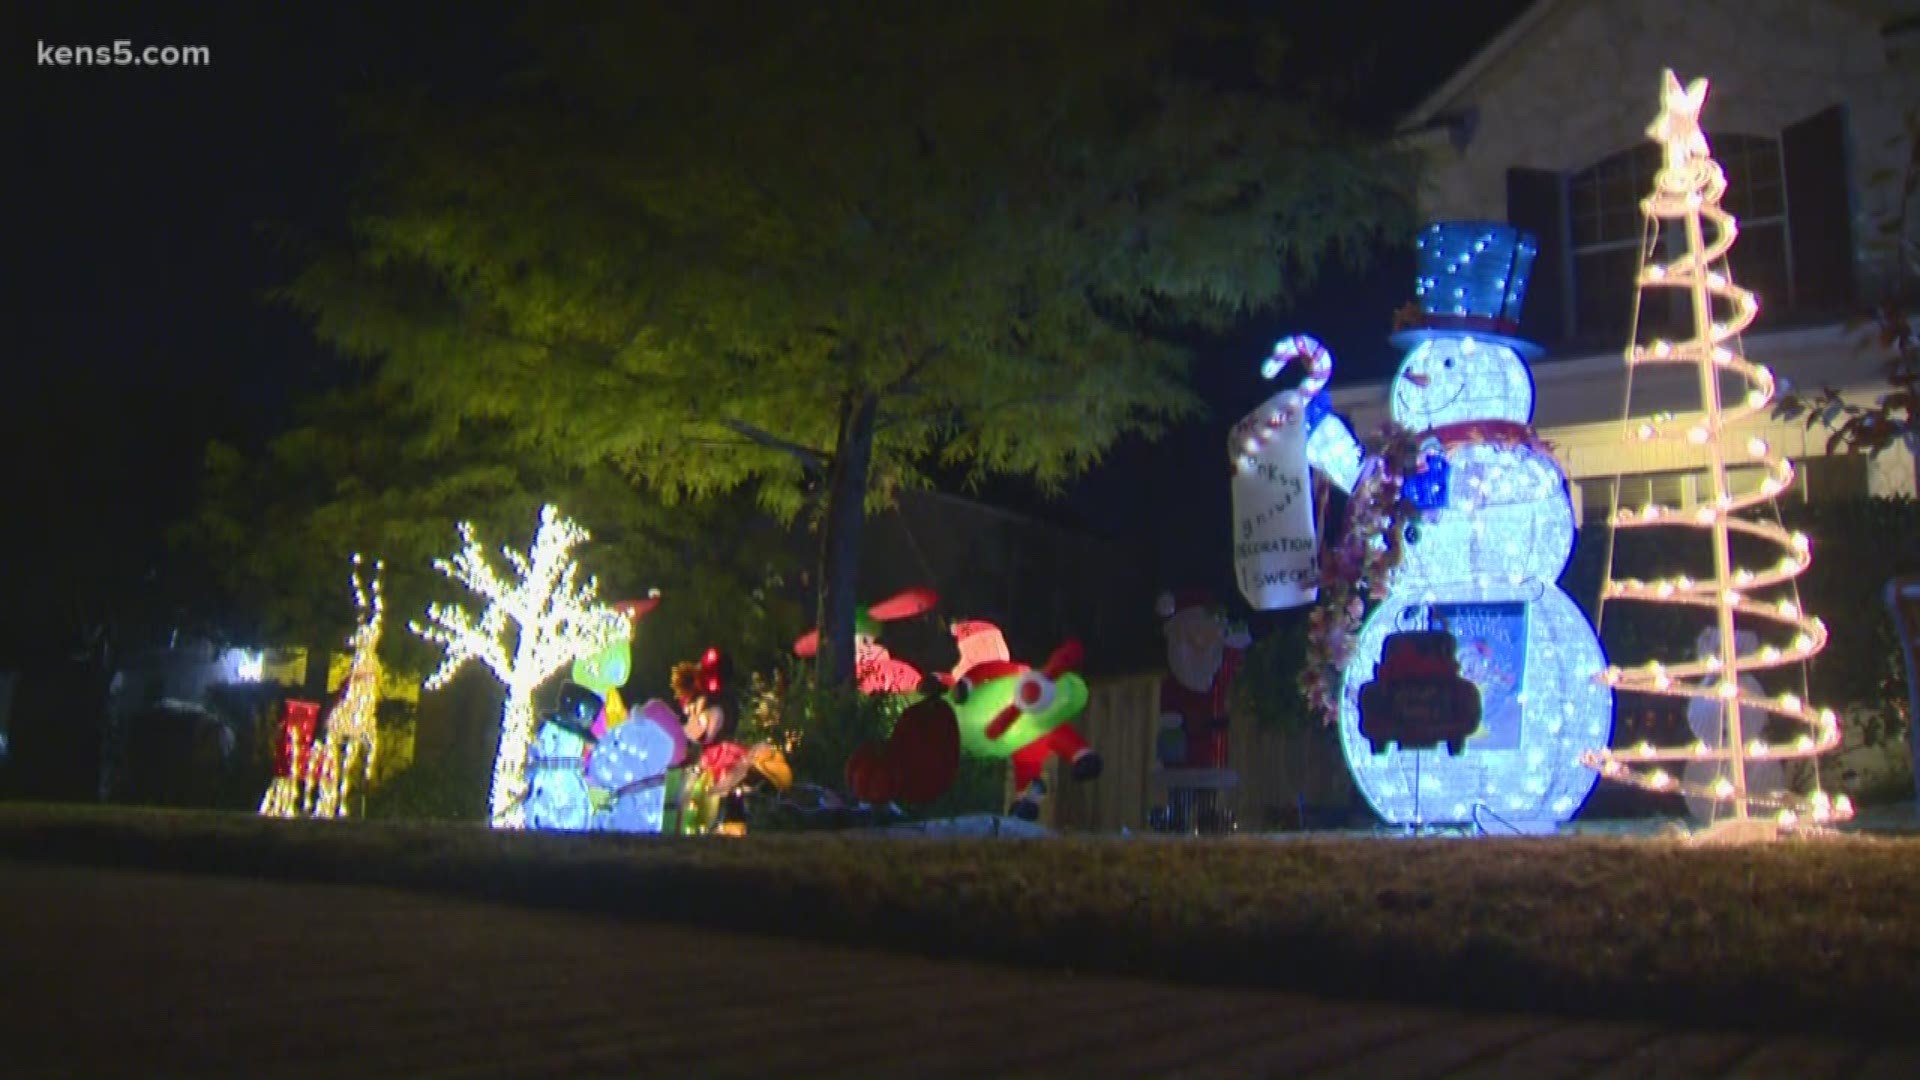 The HOA says the decorations were put up much too early, but the family isn't backing down in a conflict devoid of holiday cheer.